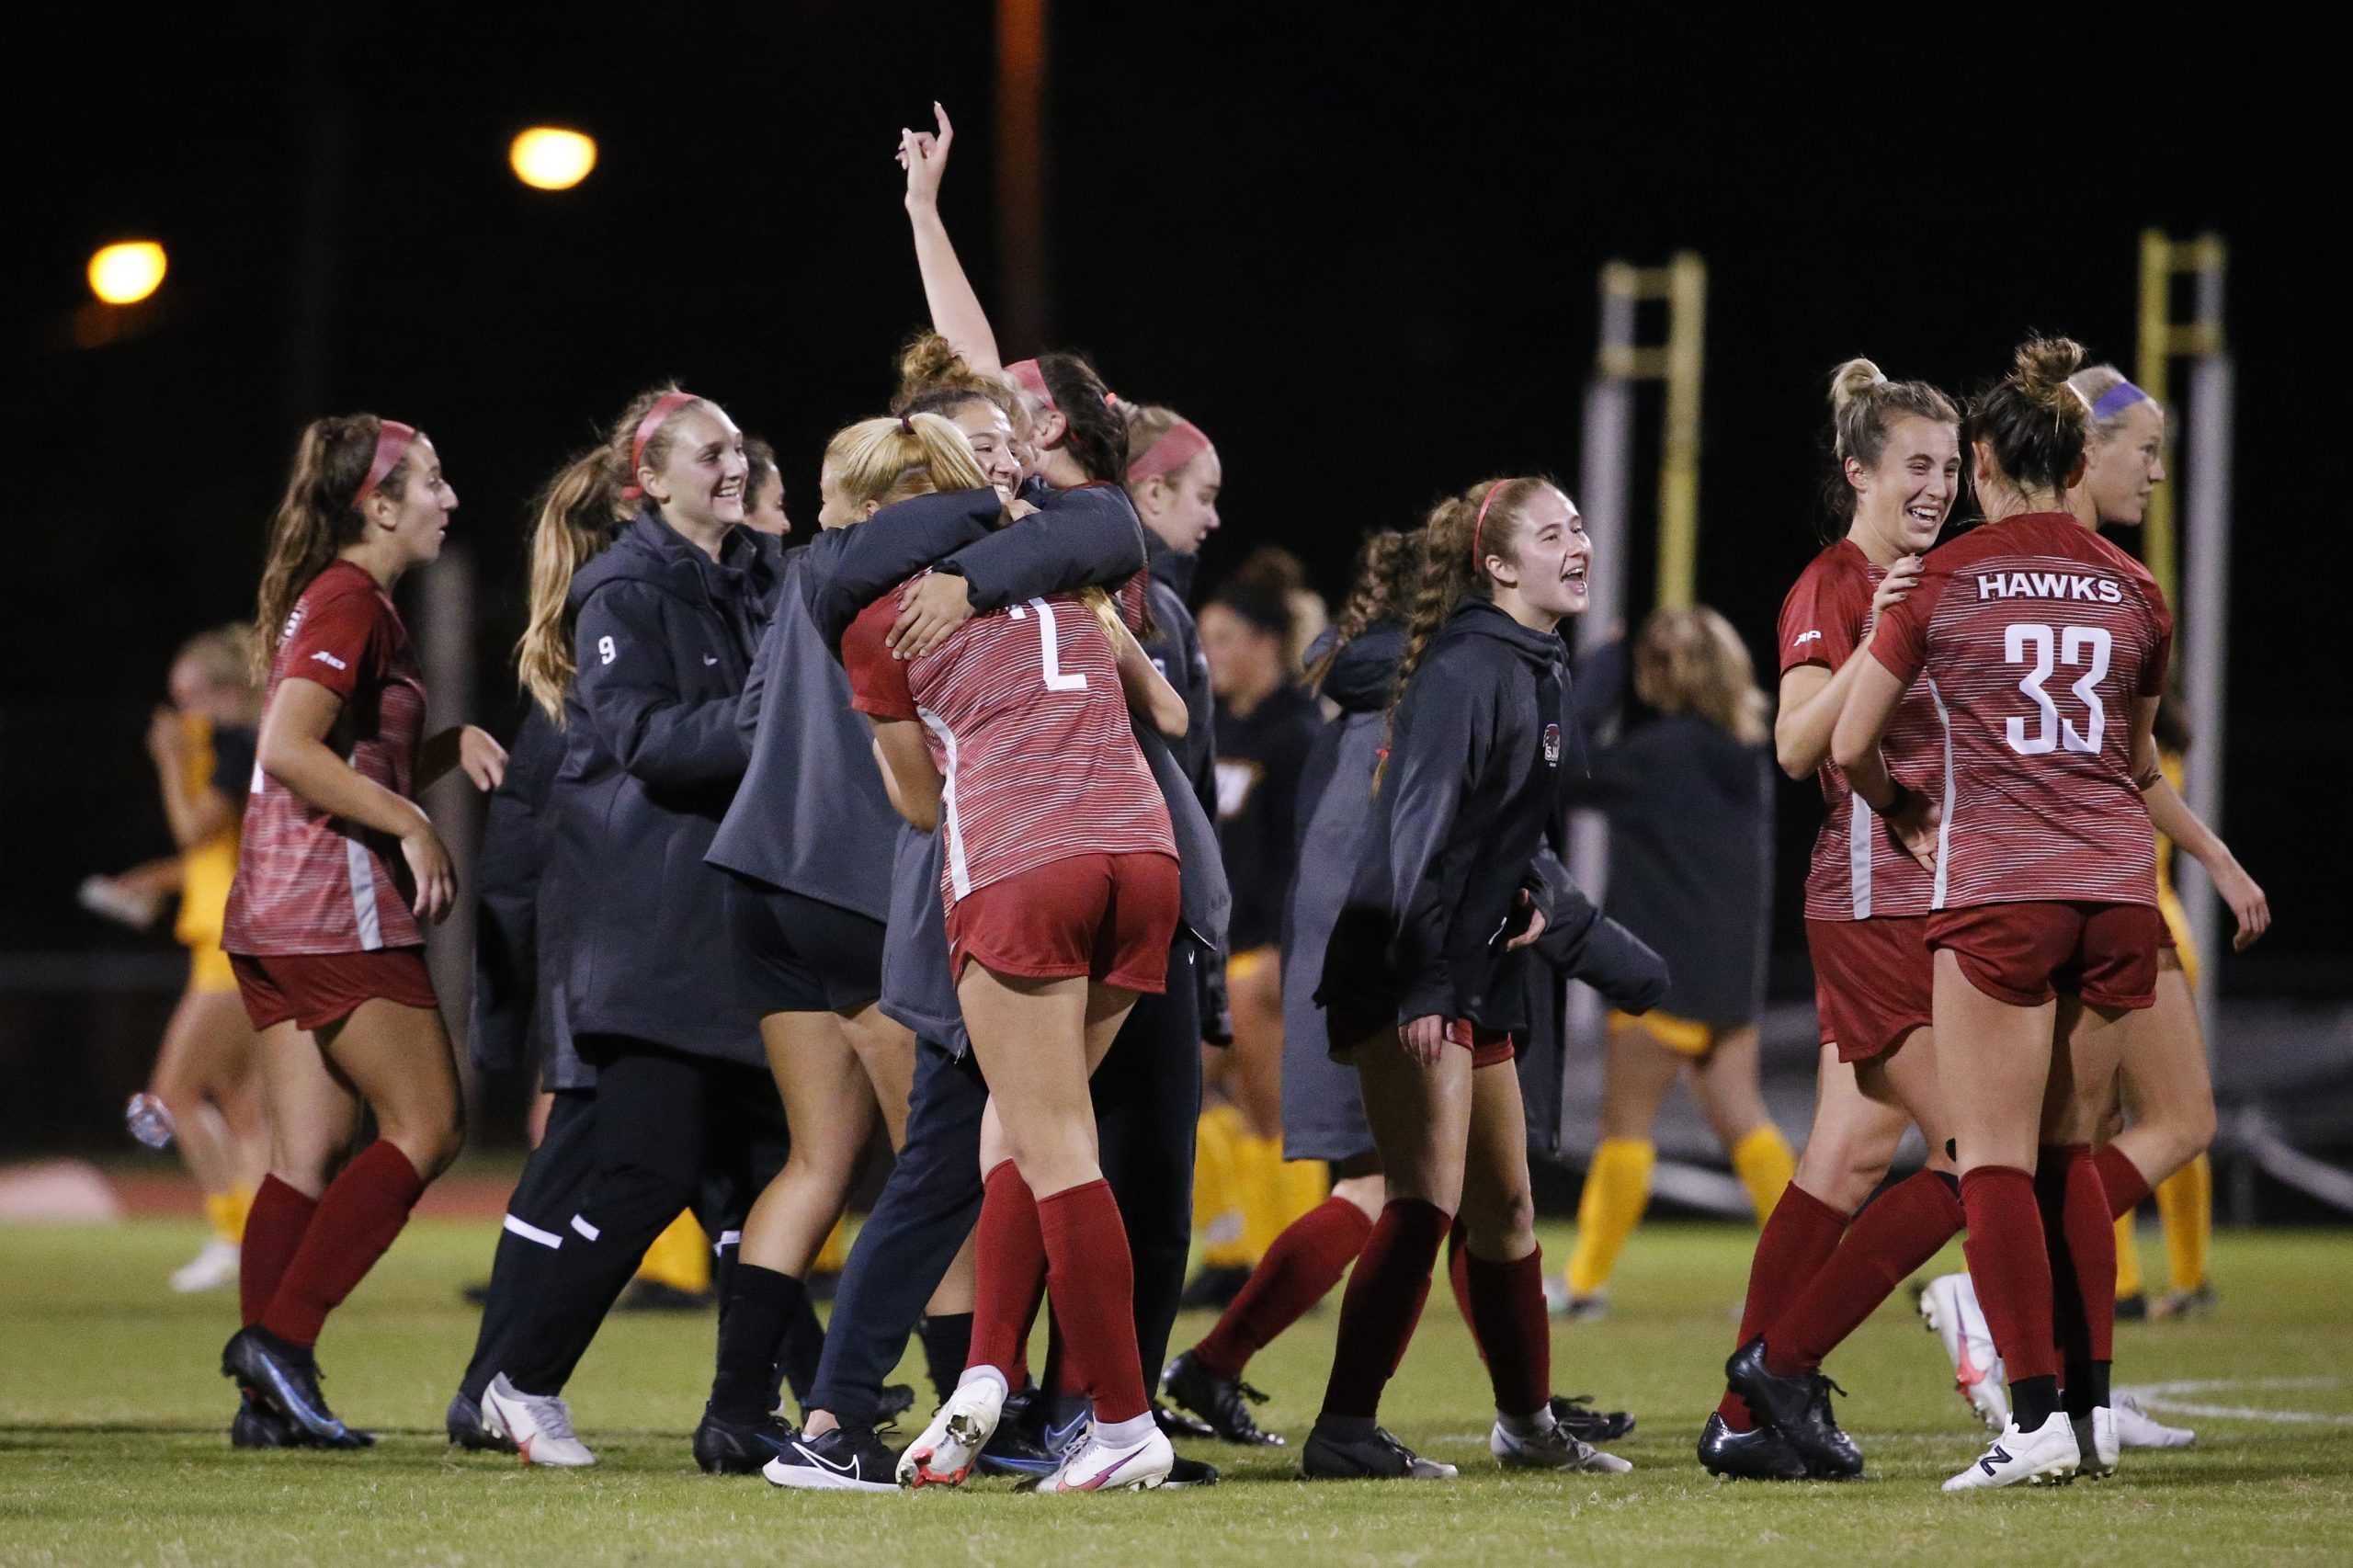 The team celebrates after their win over VCU.
PHOTO COURTESY OF THE ATLANTIC 10.